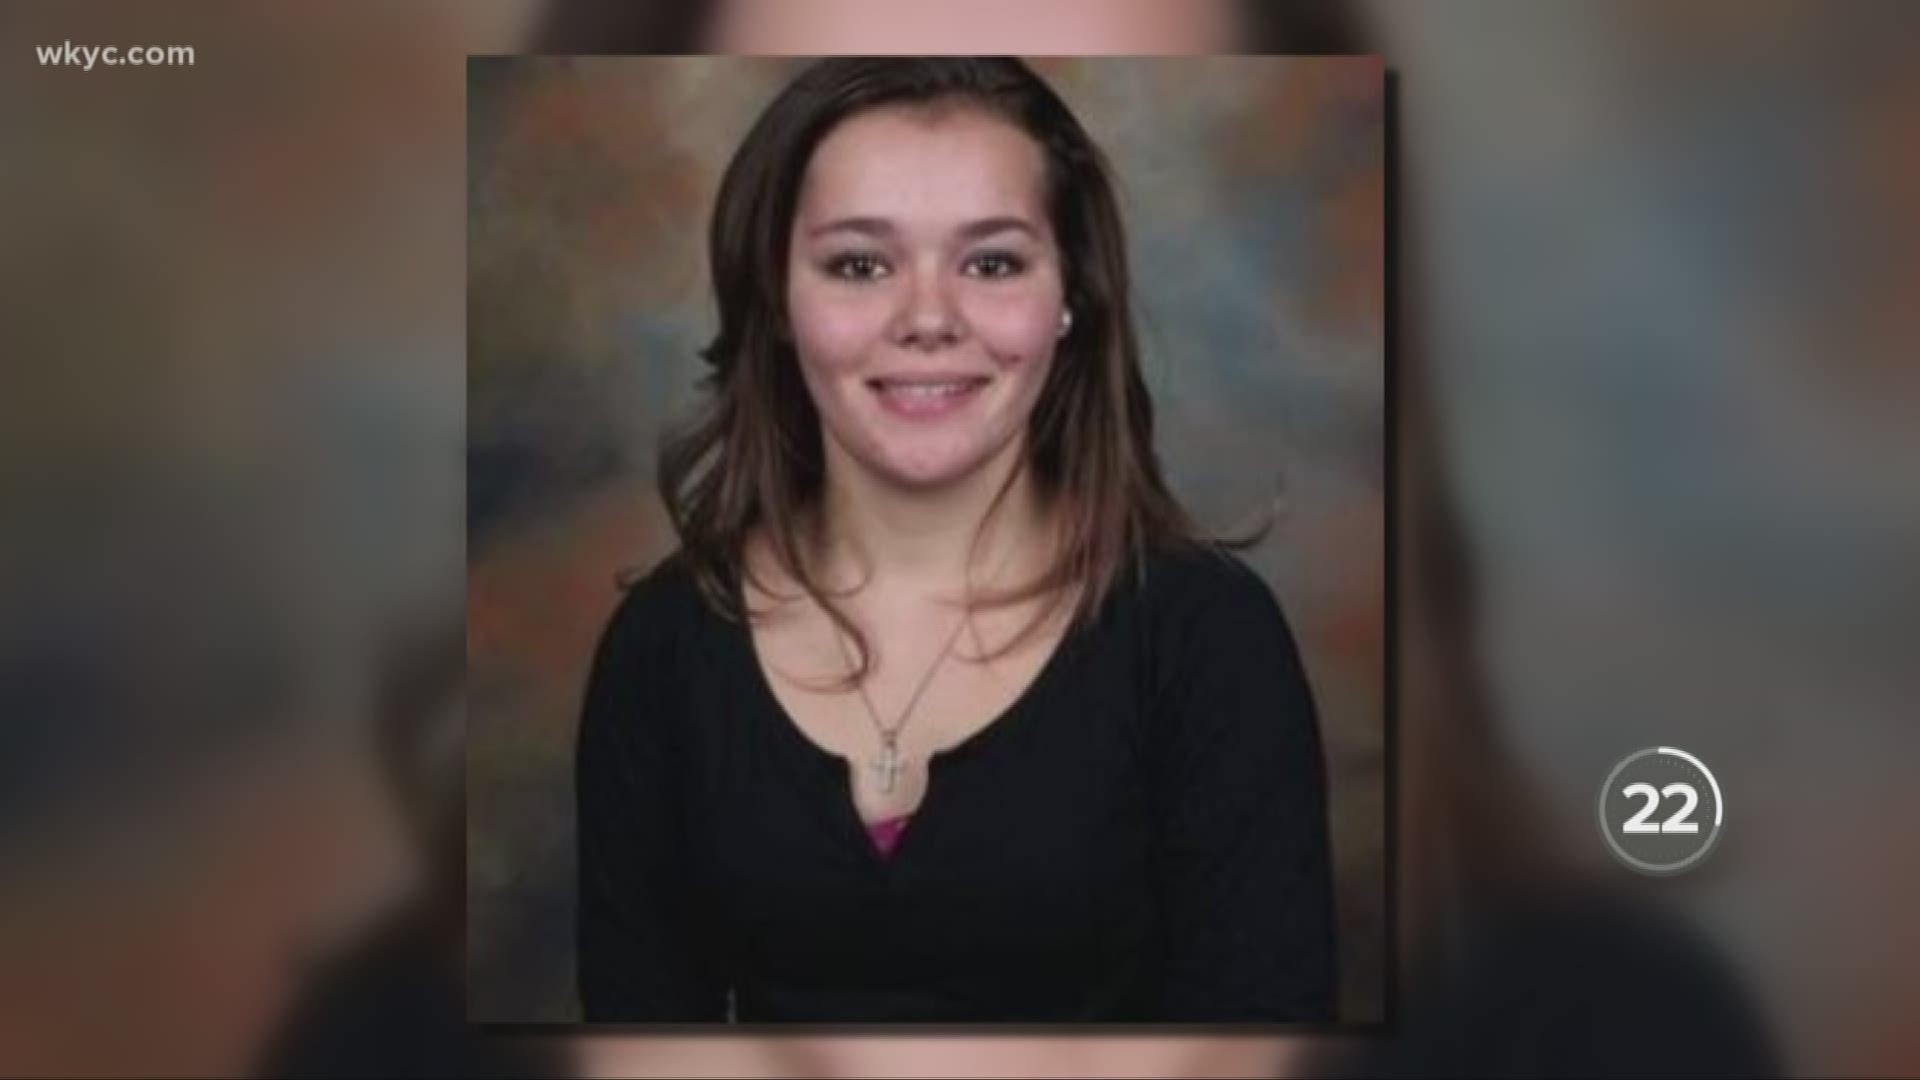 Ashtabula teen reported missing in 2016 found safe